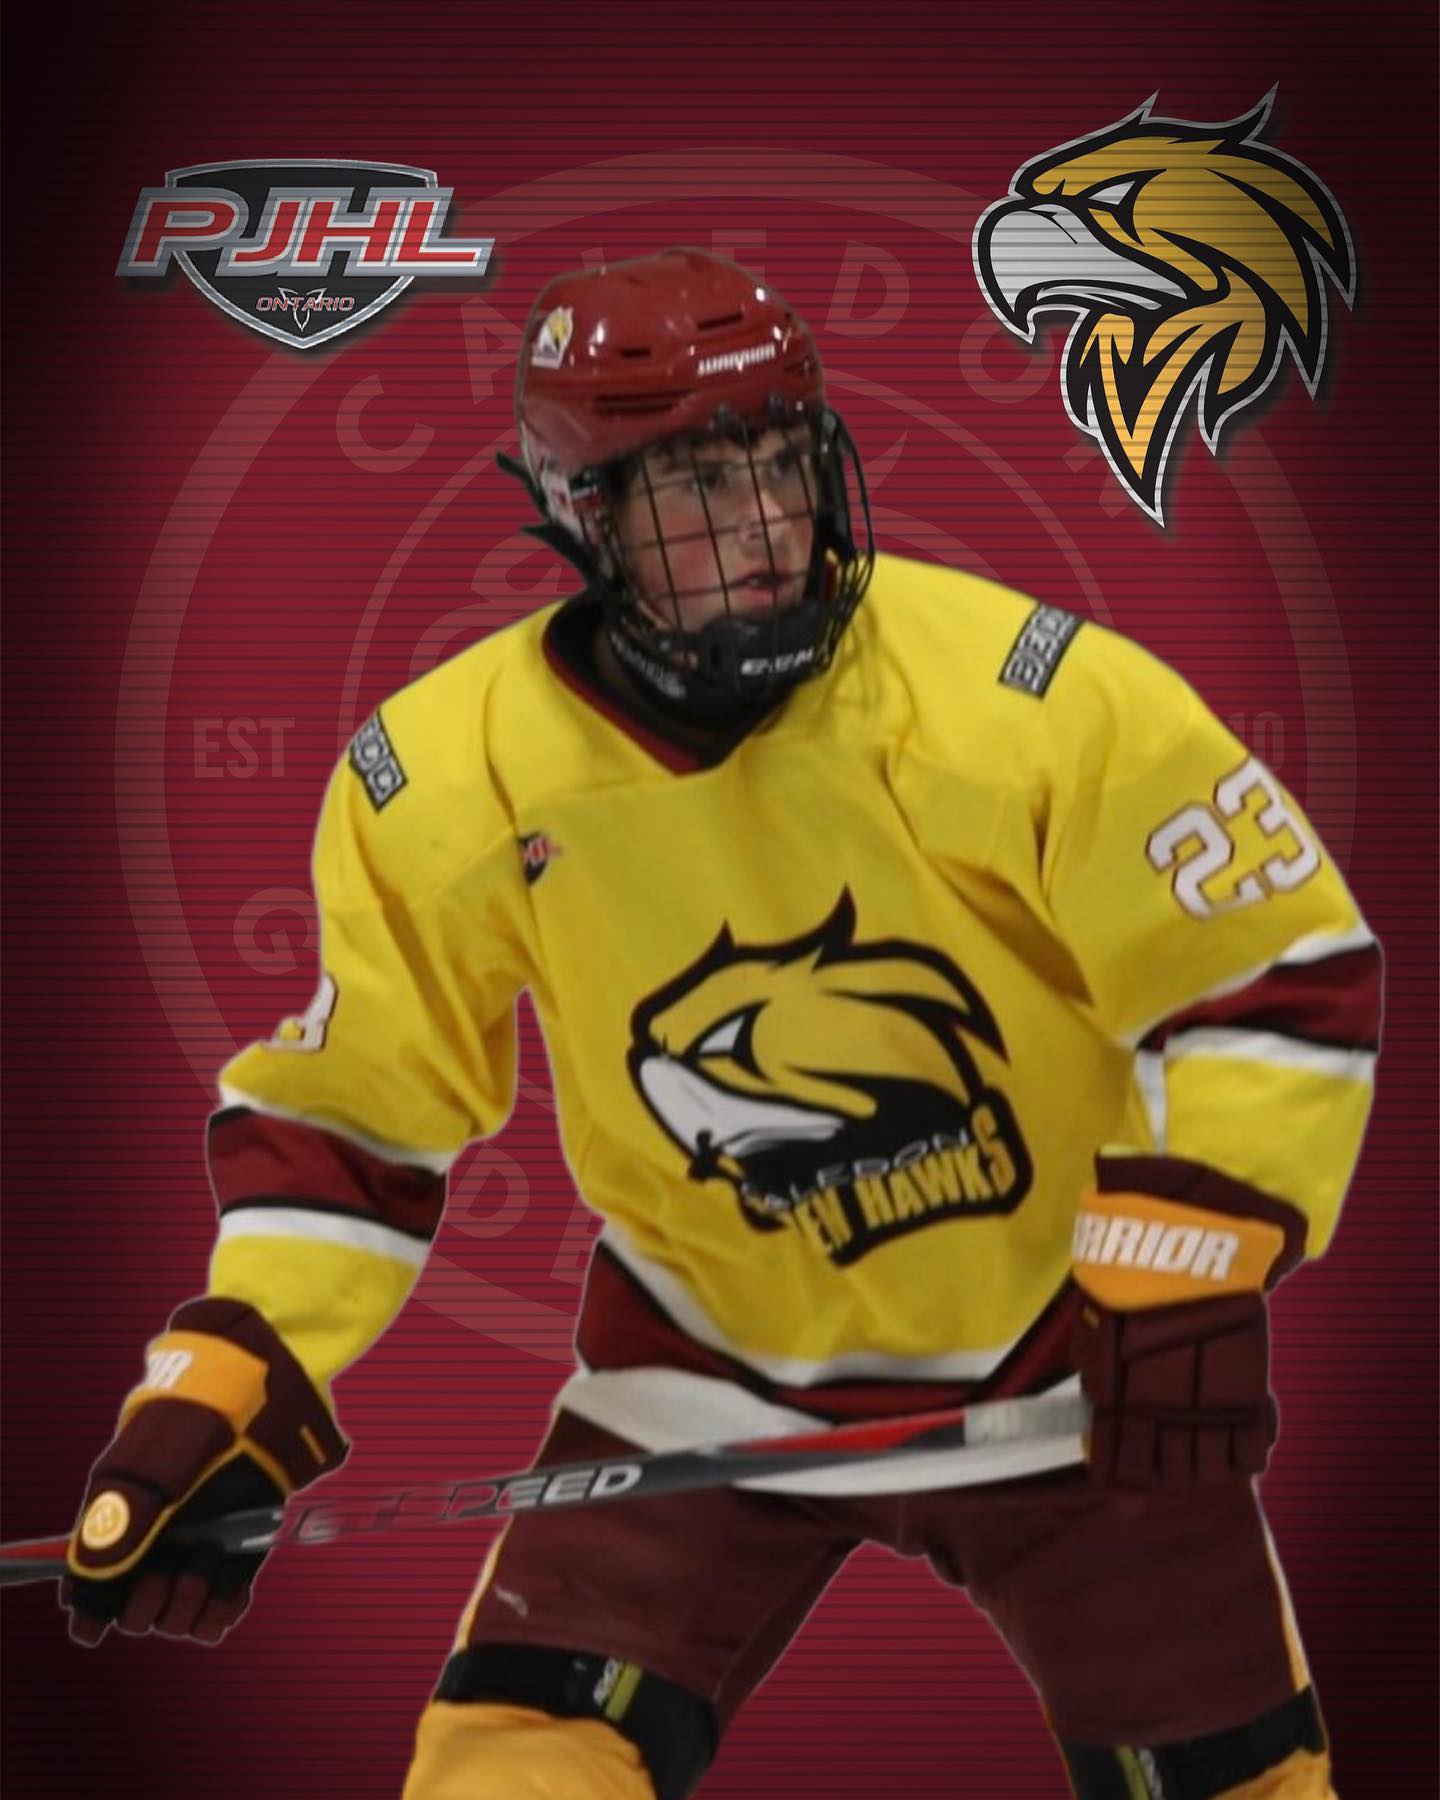 The Golden Hawks would
like to congratulate Liam Grant for being selected to represent the Caledon Golden Hawks on the PJHL Northern Conference  Prospect Team. This year
the North will play the West in Mitchell Ontario
on Saturday November 5th at 1:30 pm!
#caledongoldenhawks #PJHL #prospectsgame
#hockey #northernconference #allstar